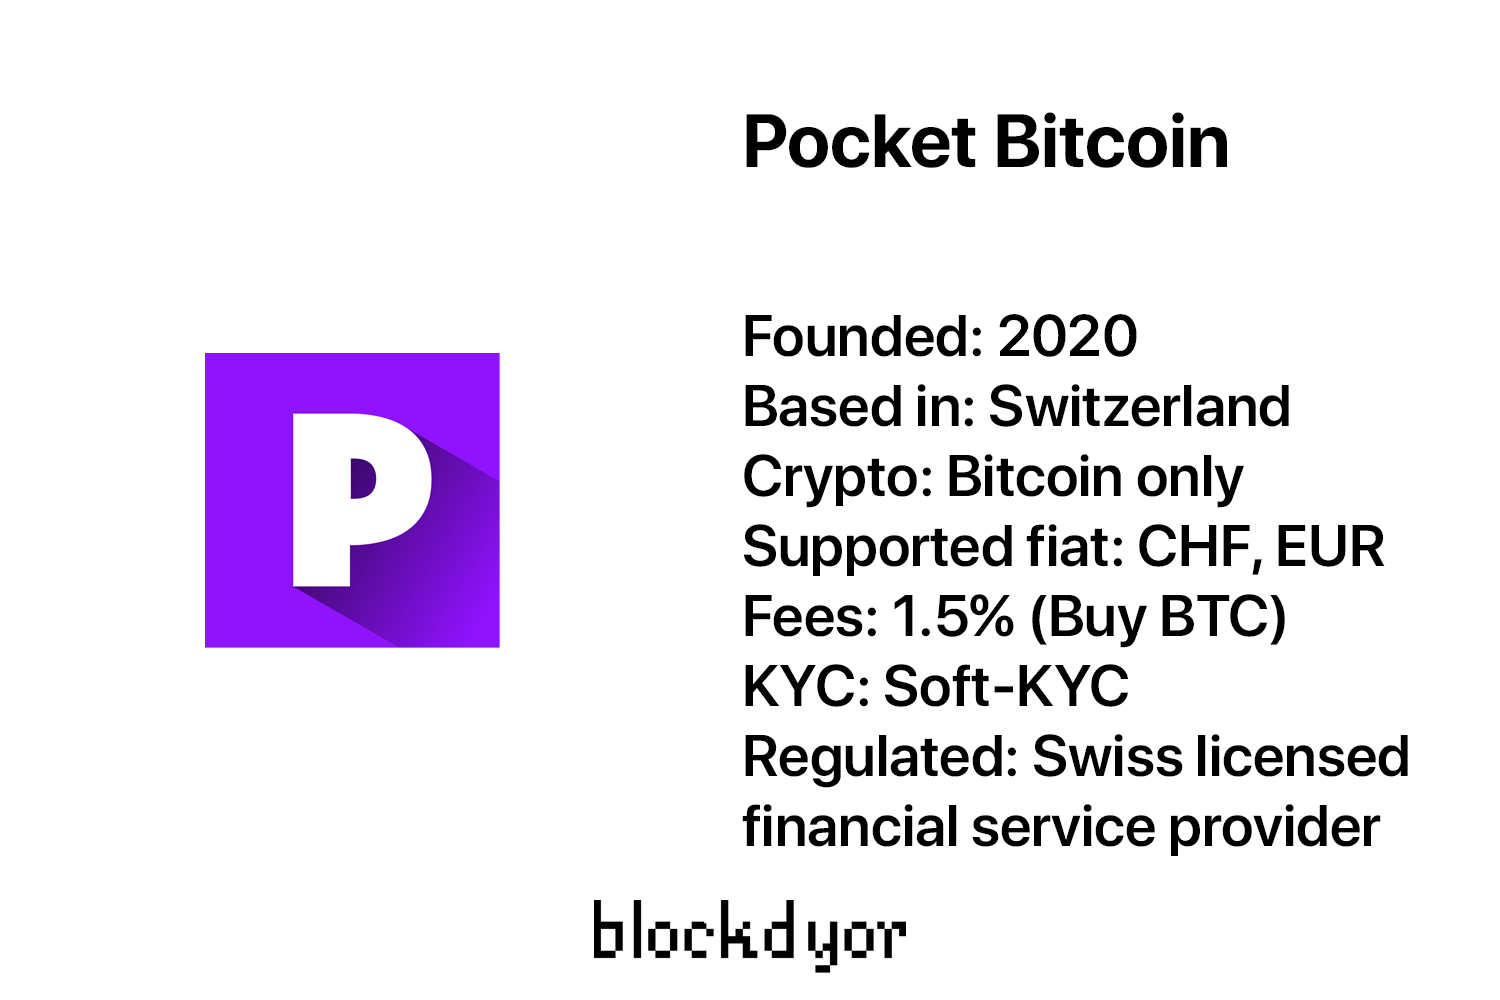 Pocket Bitcoin Overview